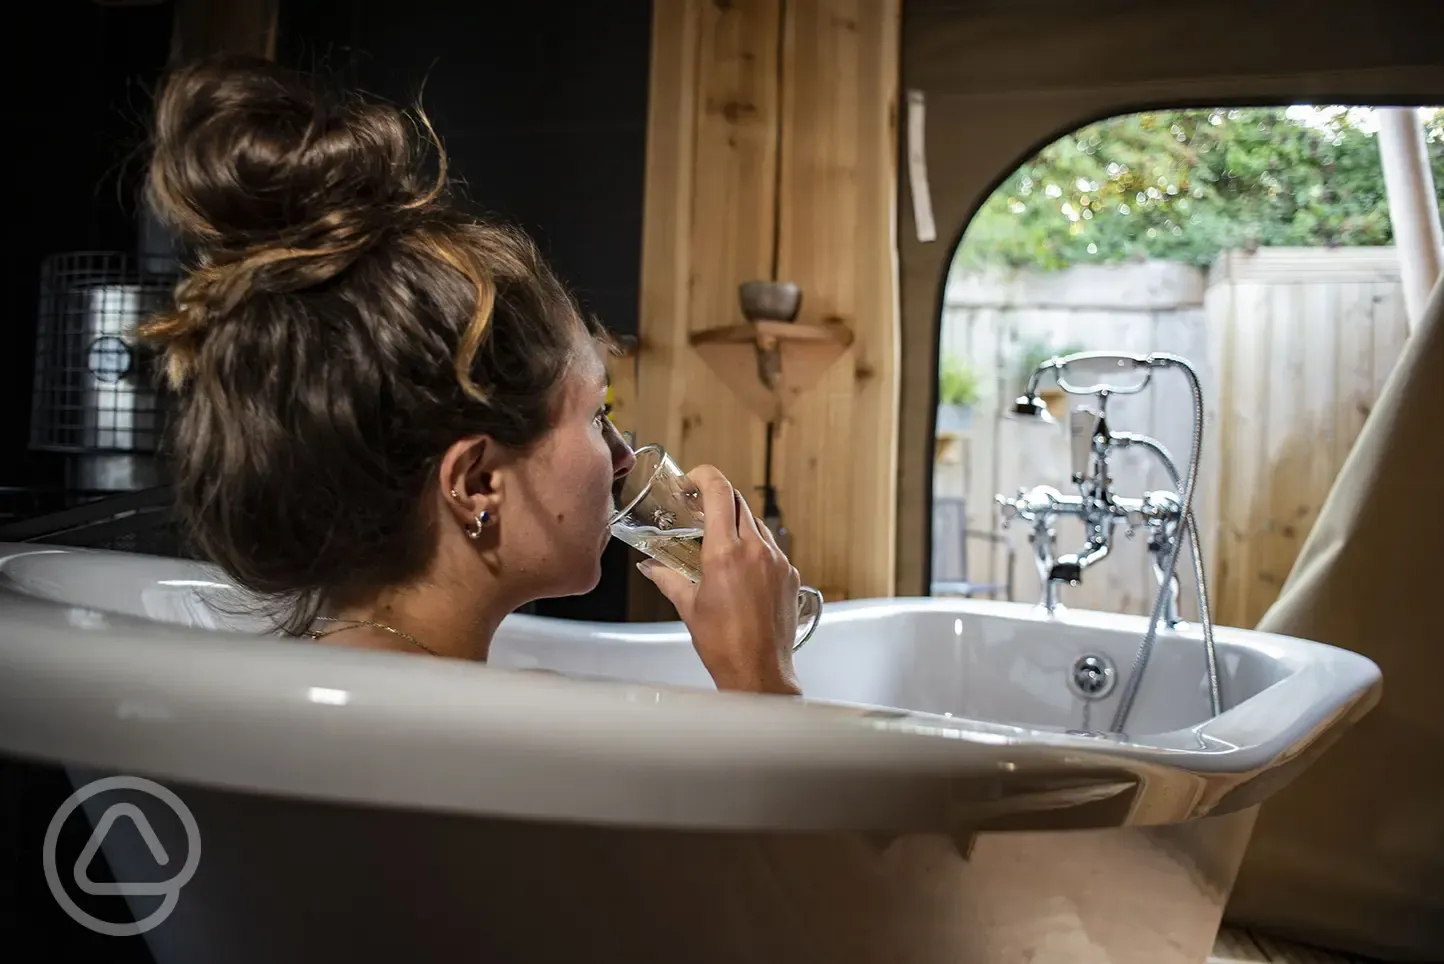 Soak in the slipper bath with a glass of something delicious